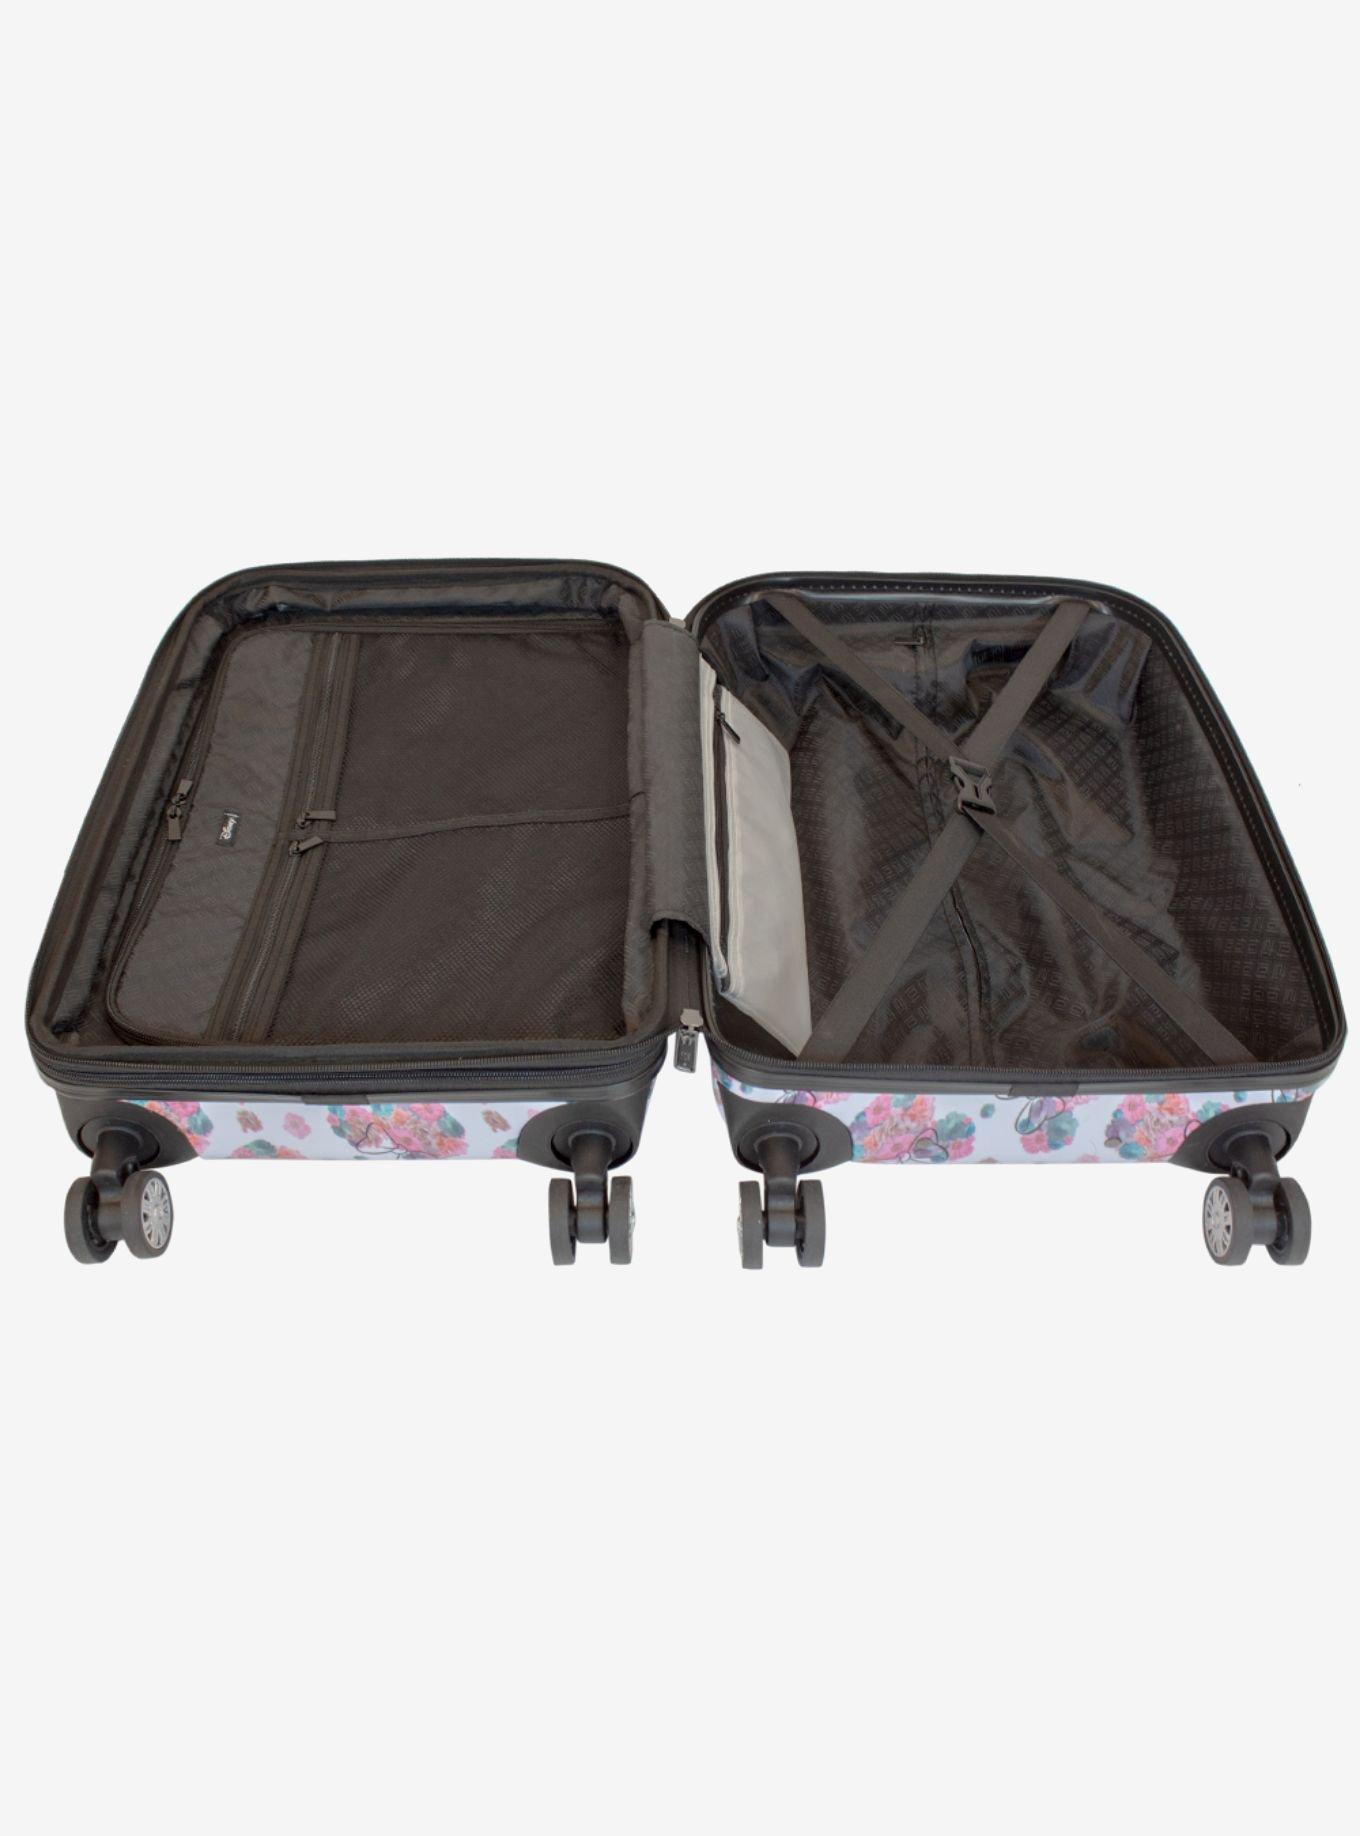 FUL Disney Minnie Mouse Floral 21 Inch Printed Hardside Rolling Luggage, , alternate